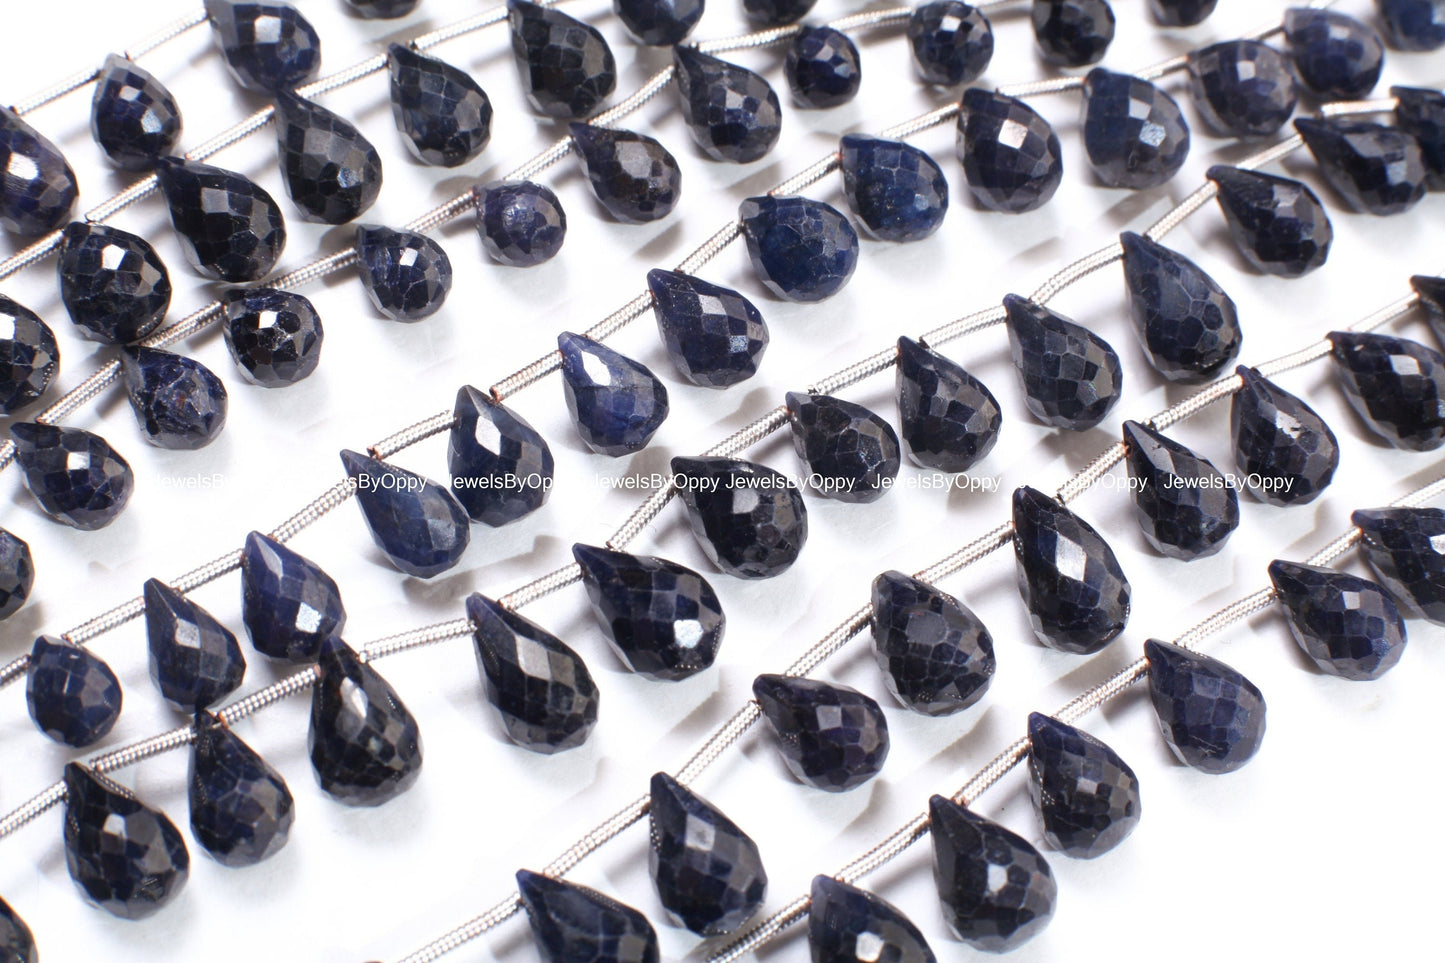 Sapphire Briolette, Natural Blue Sapphire Faceted Teardrop 6x10.5-7x11.5mm Gemstone Briolette Jewelry Beads 10 pcs or 20 pcs Strand